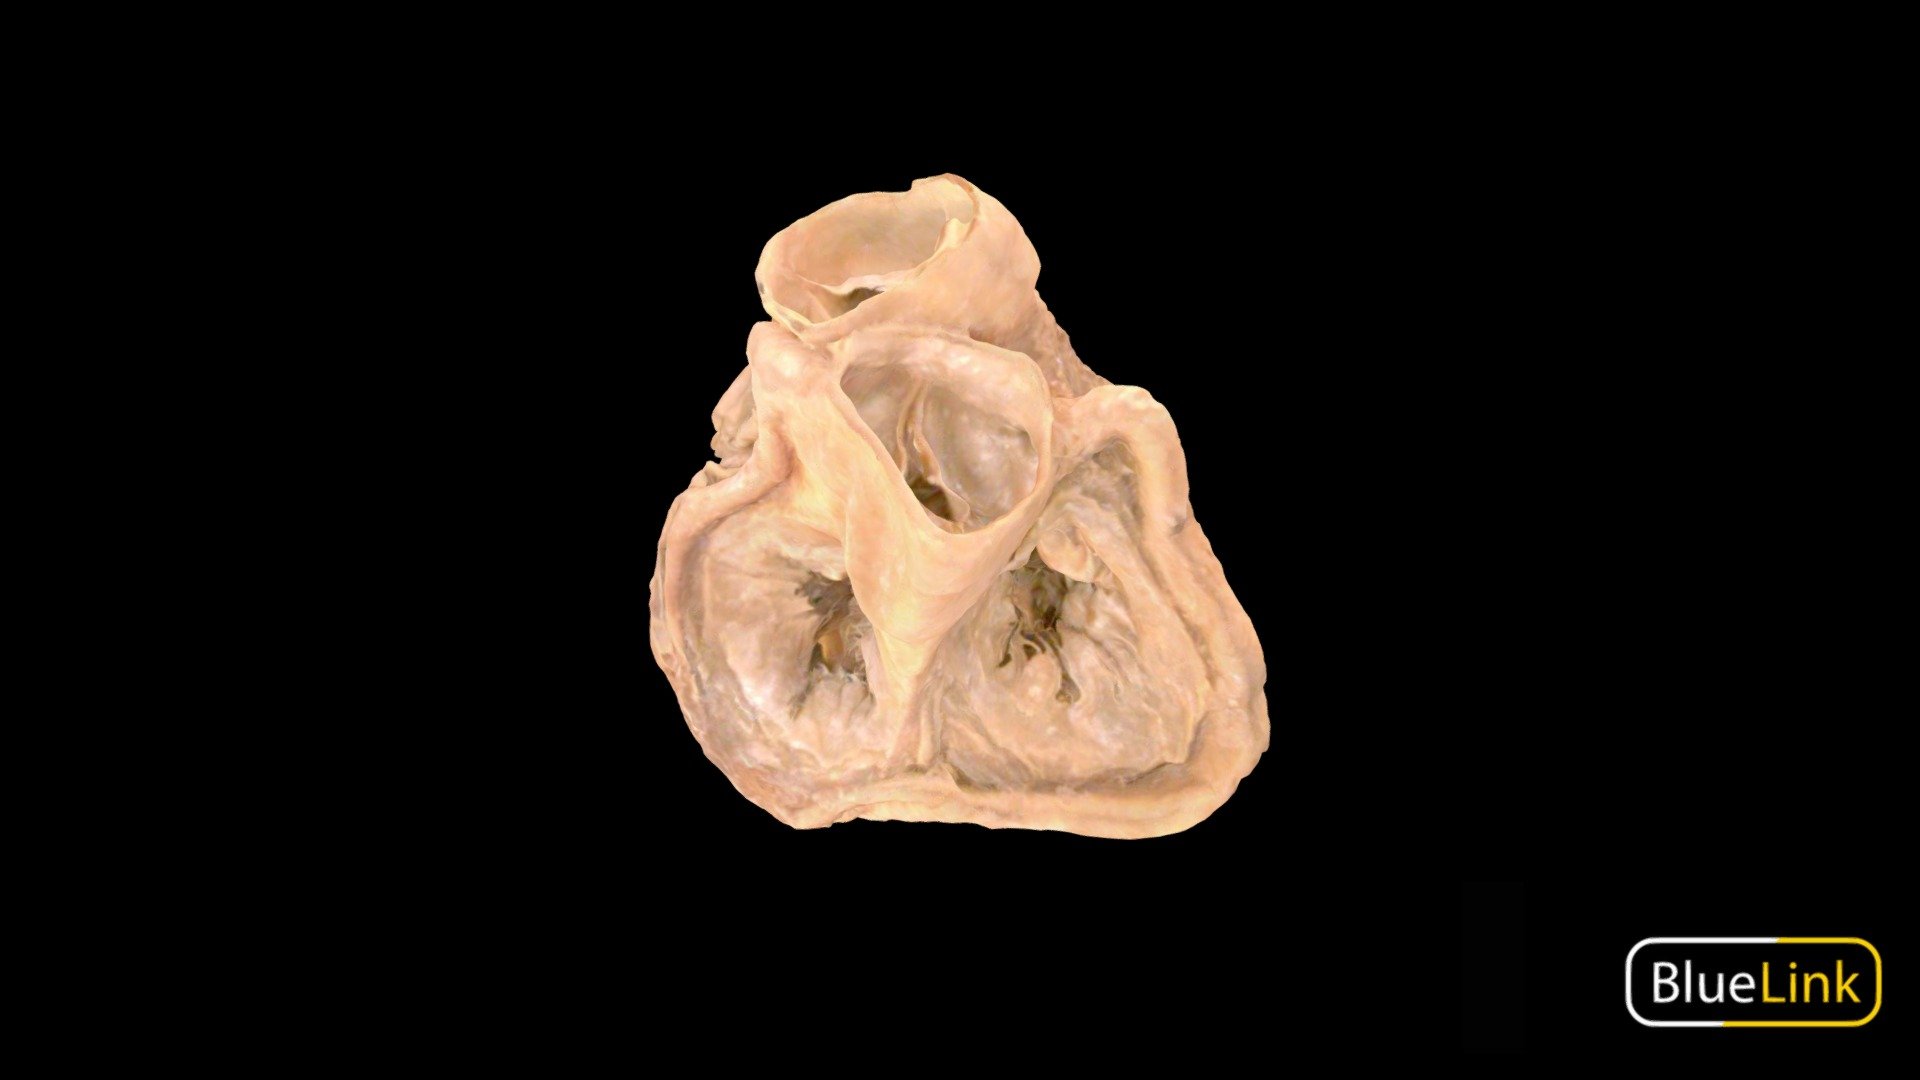 Human heart with atria removed to show heart valves
Captured with: Einscan Pro
Captured by: Will Gribbin
Edited by: Cristina Prall
University of Michigan
25981-C01 - Heart Valves - 3D model by Bluelink Anatomy - University of Michigan (@bluelinkanatomy) 3d model